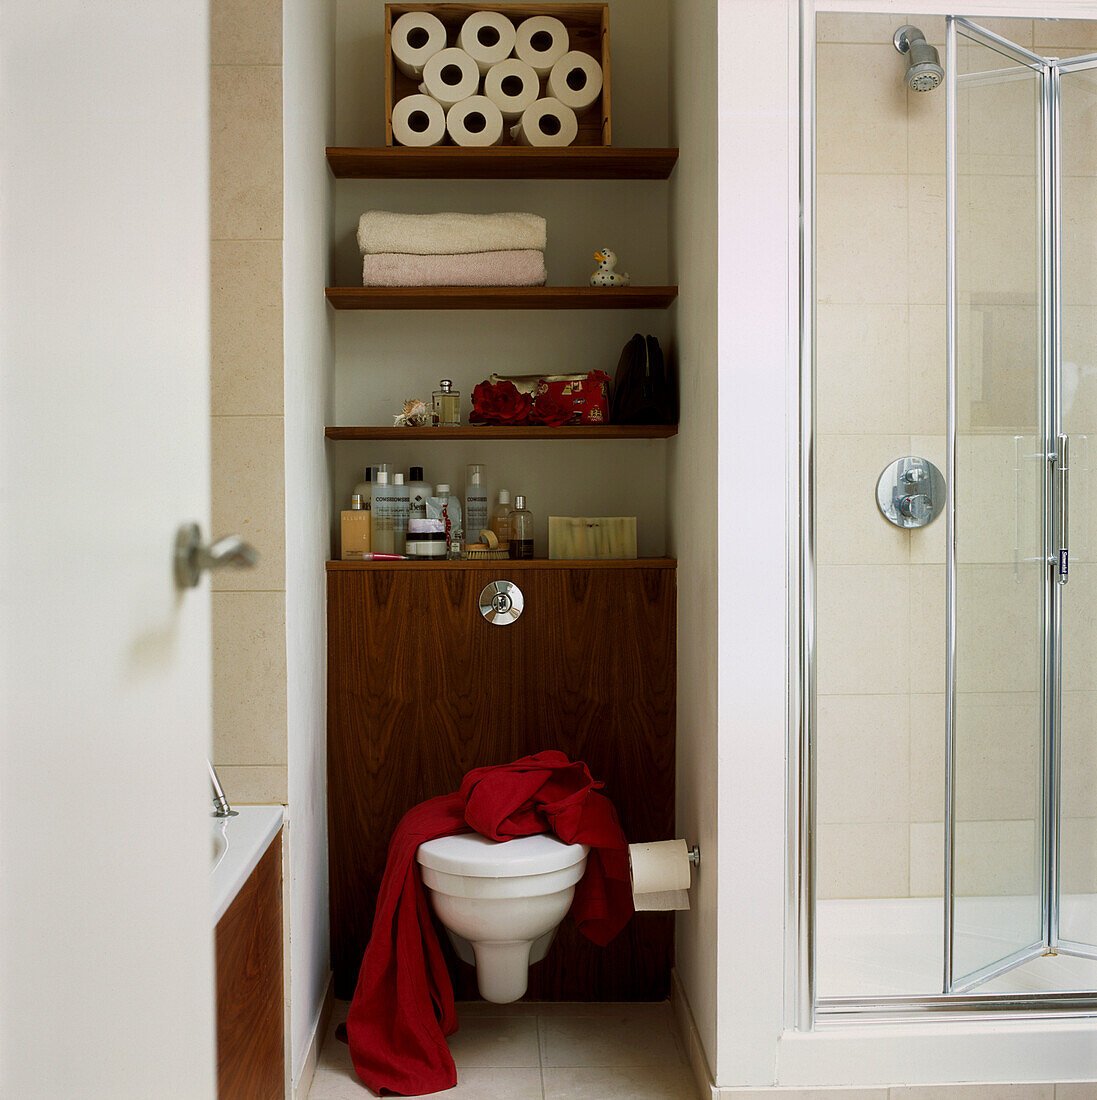 Modern small bathroom with toilet storage shelving and shower cubicle